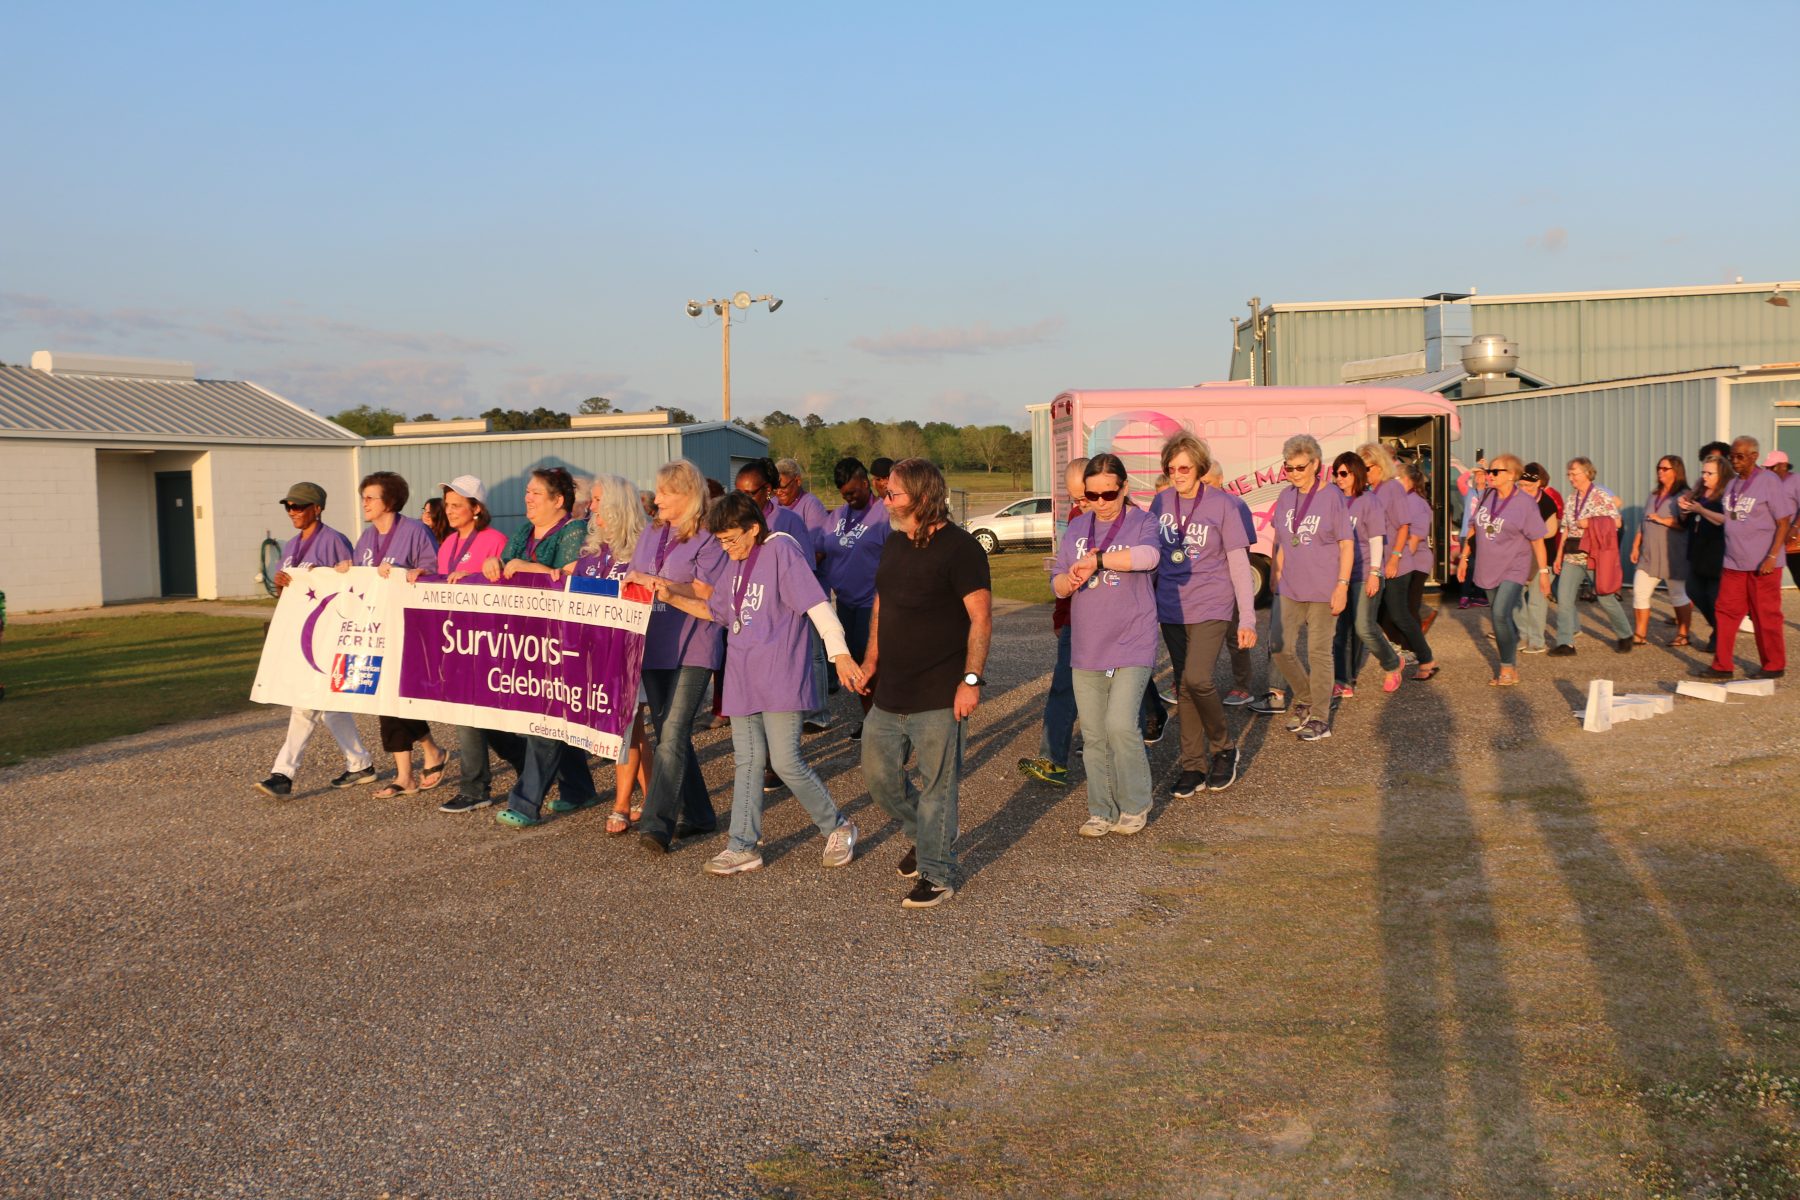 Relay For Life survivors group walking